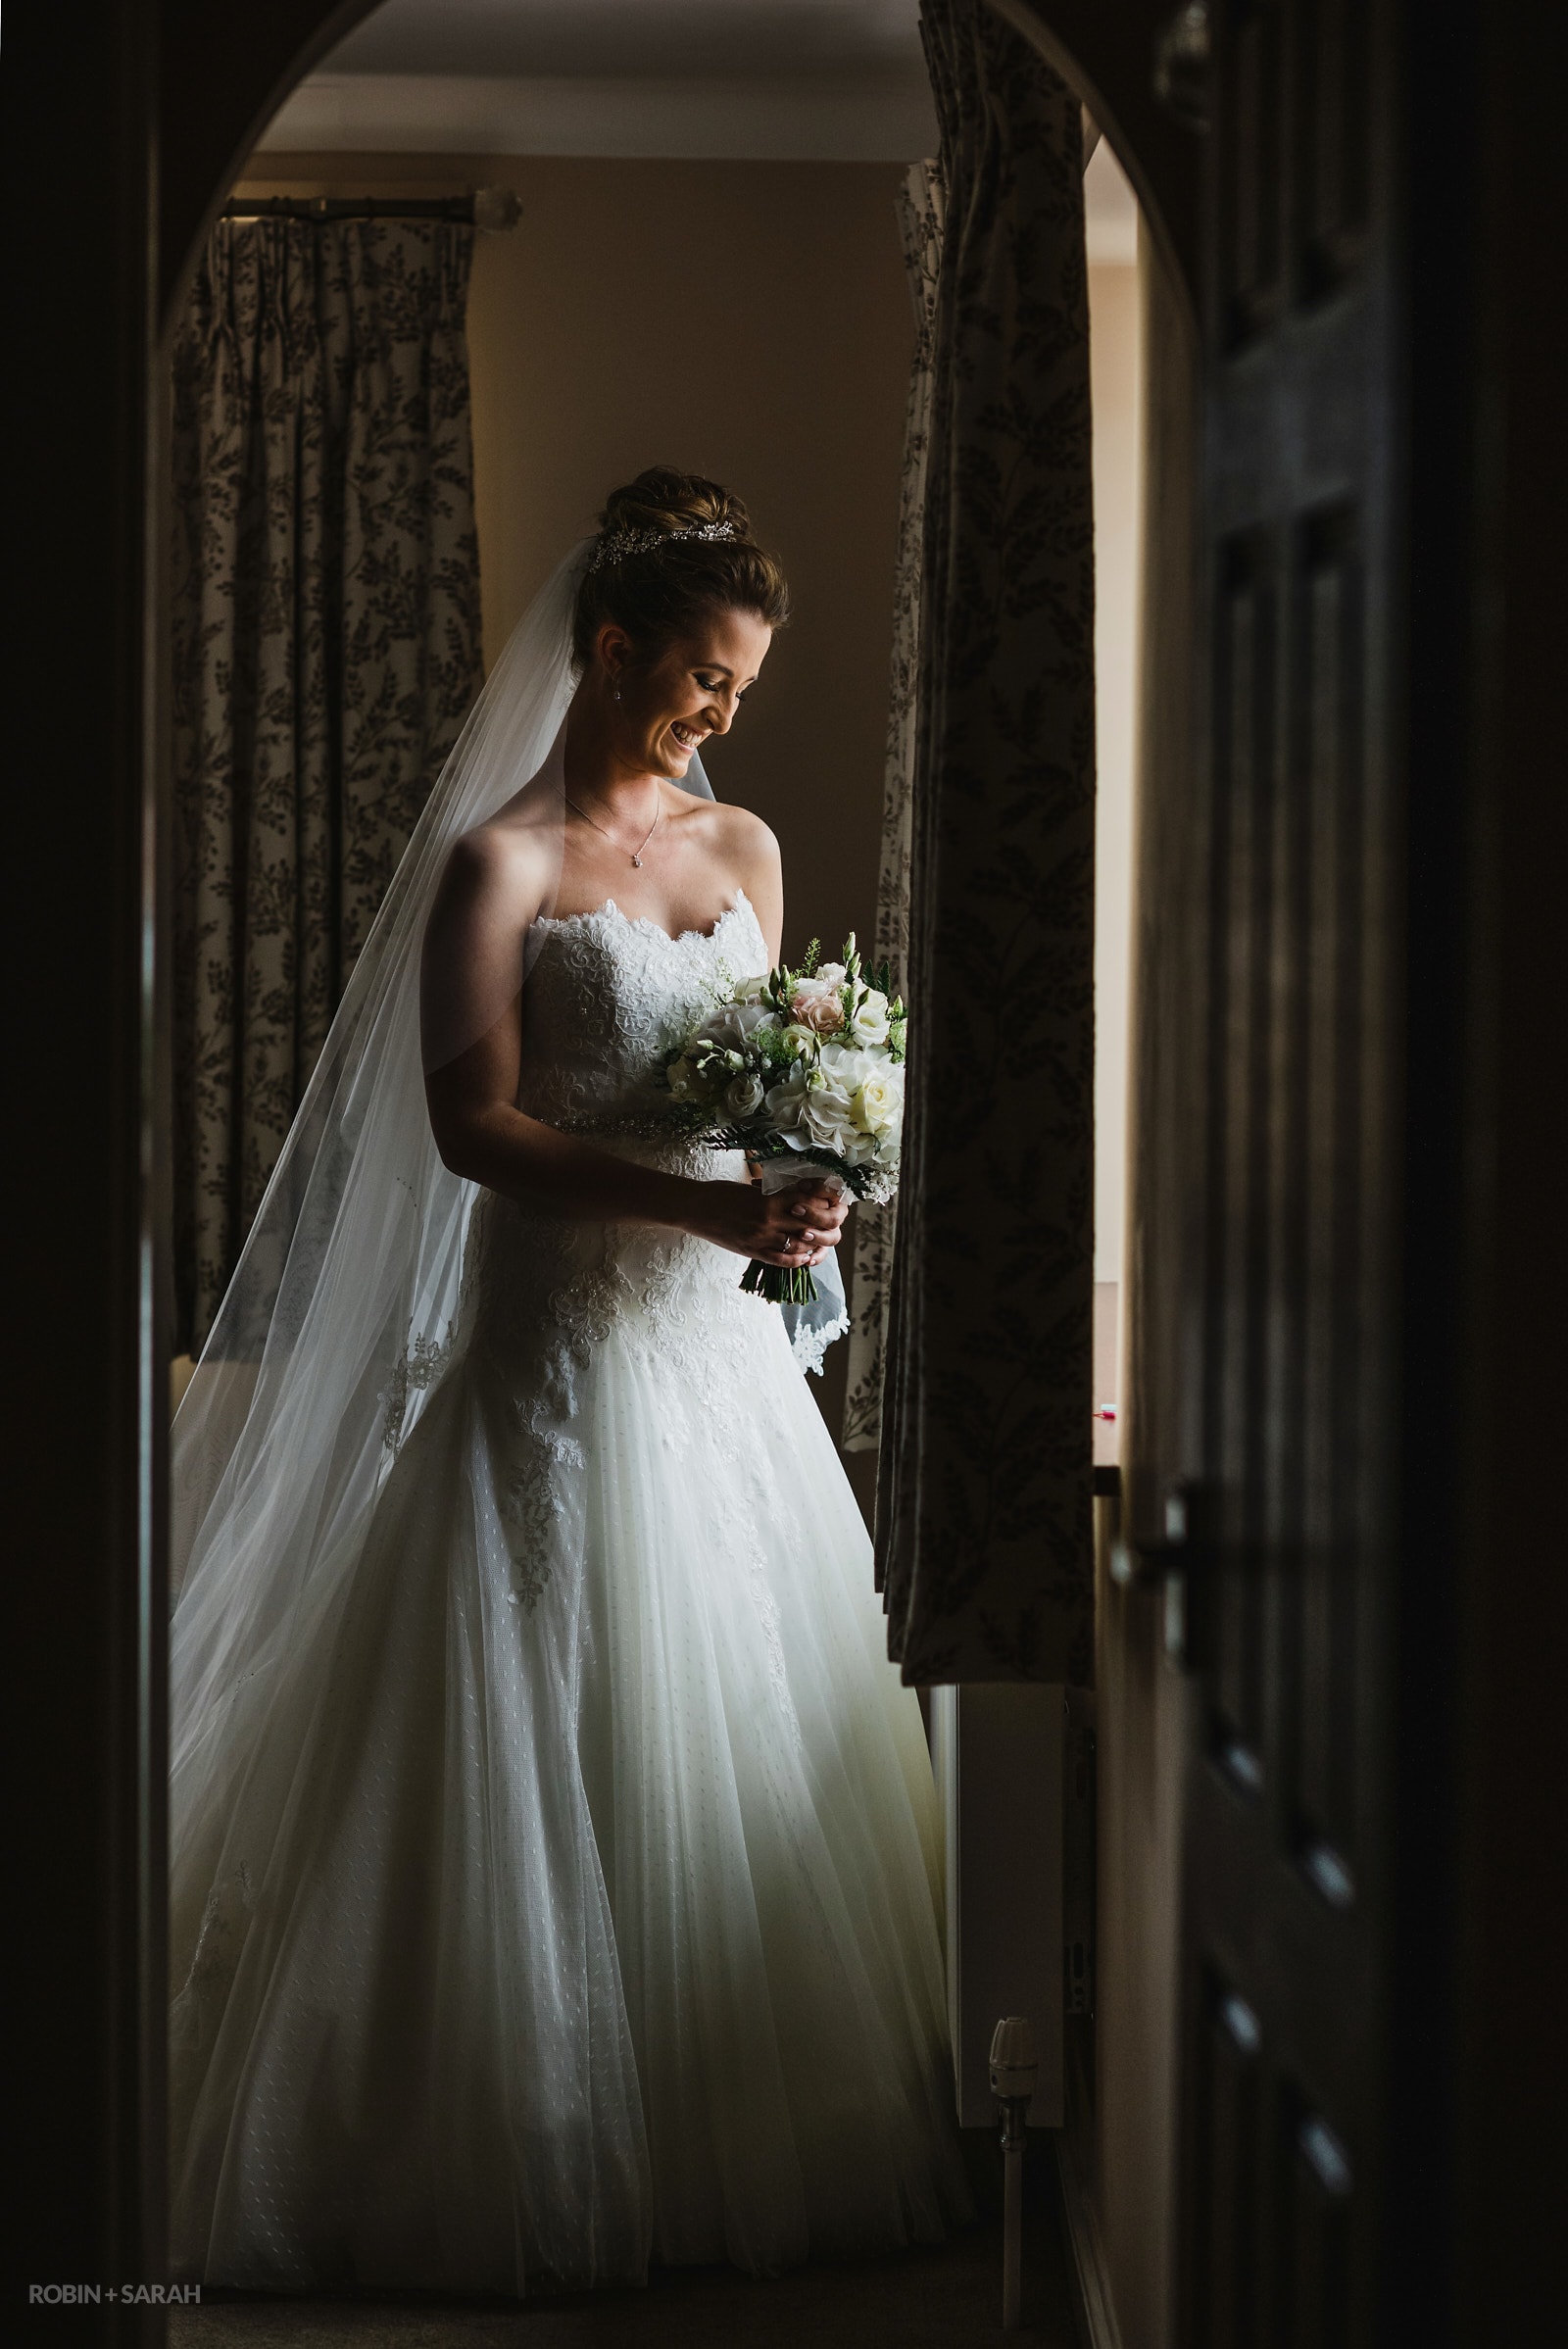 Portrait of bride wearing white wedding dress with cathedral veil standing in doorway